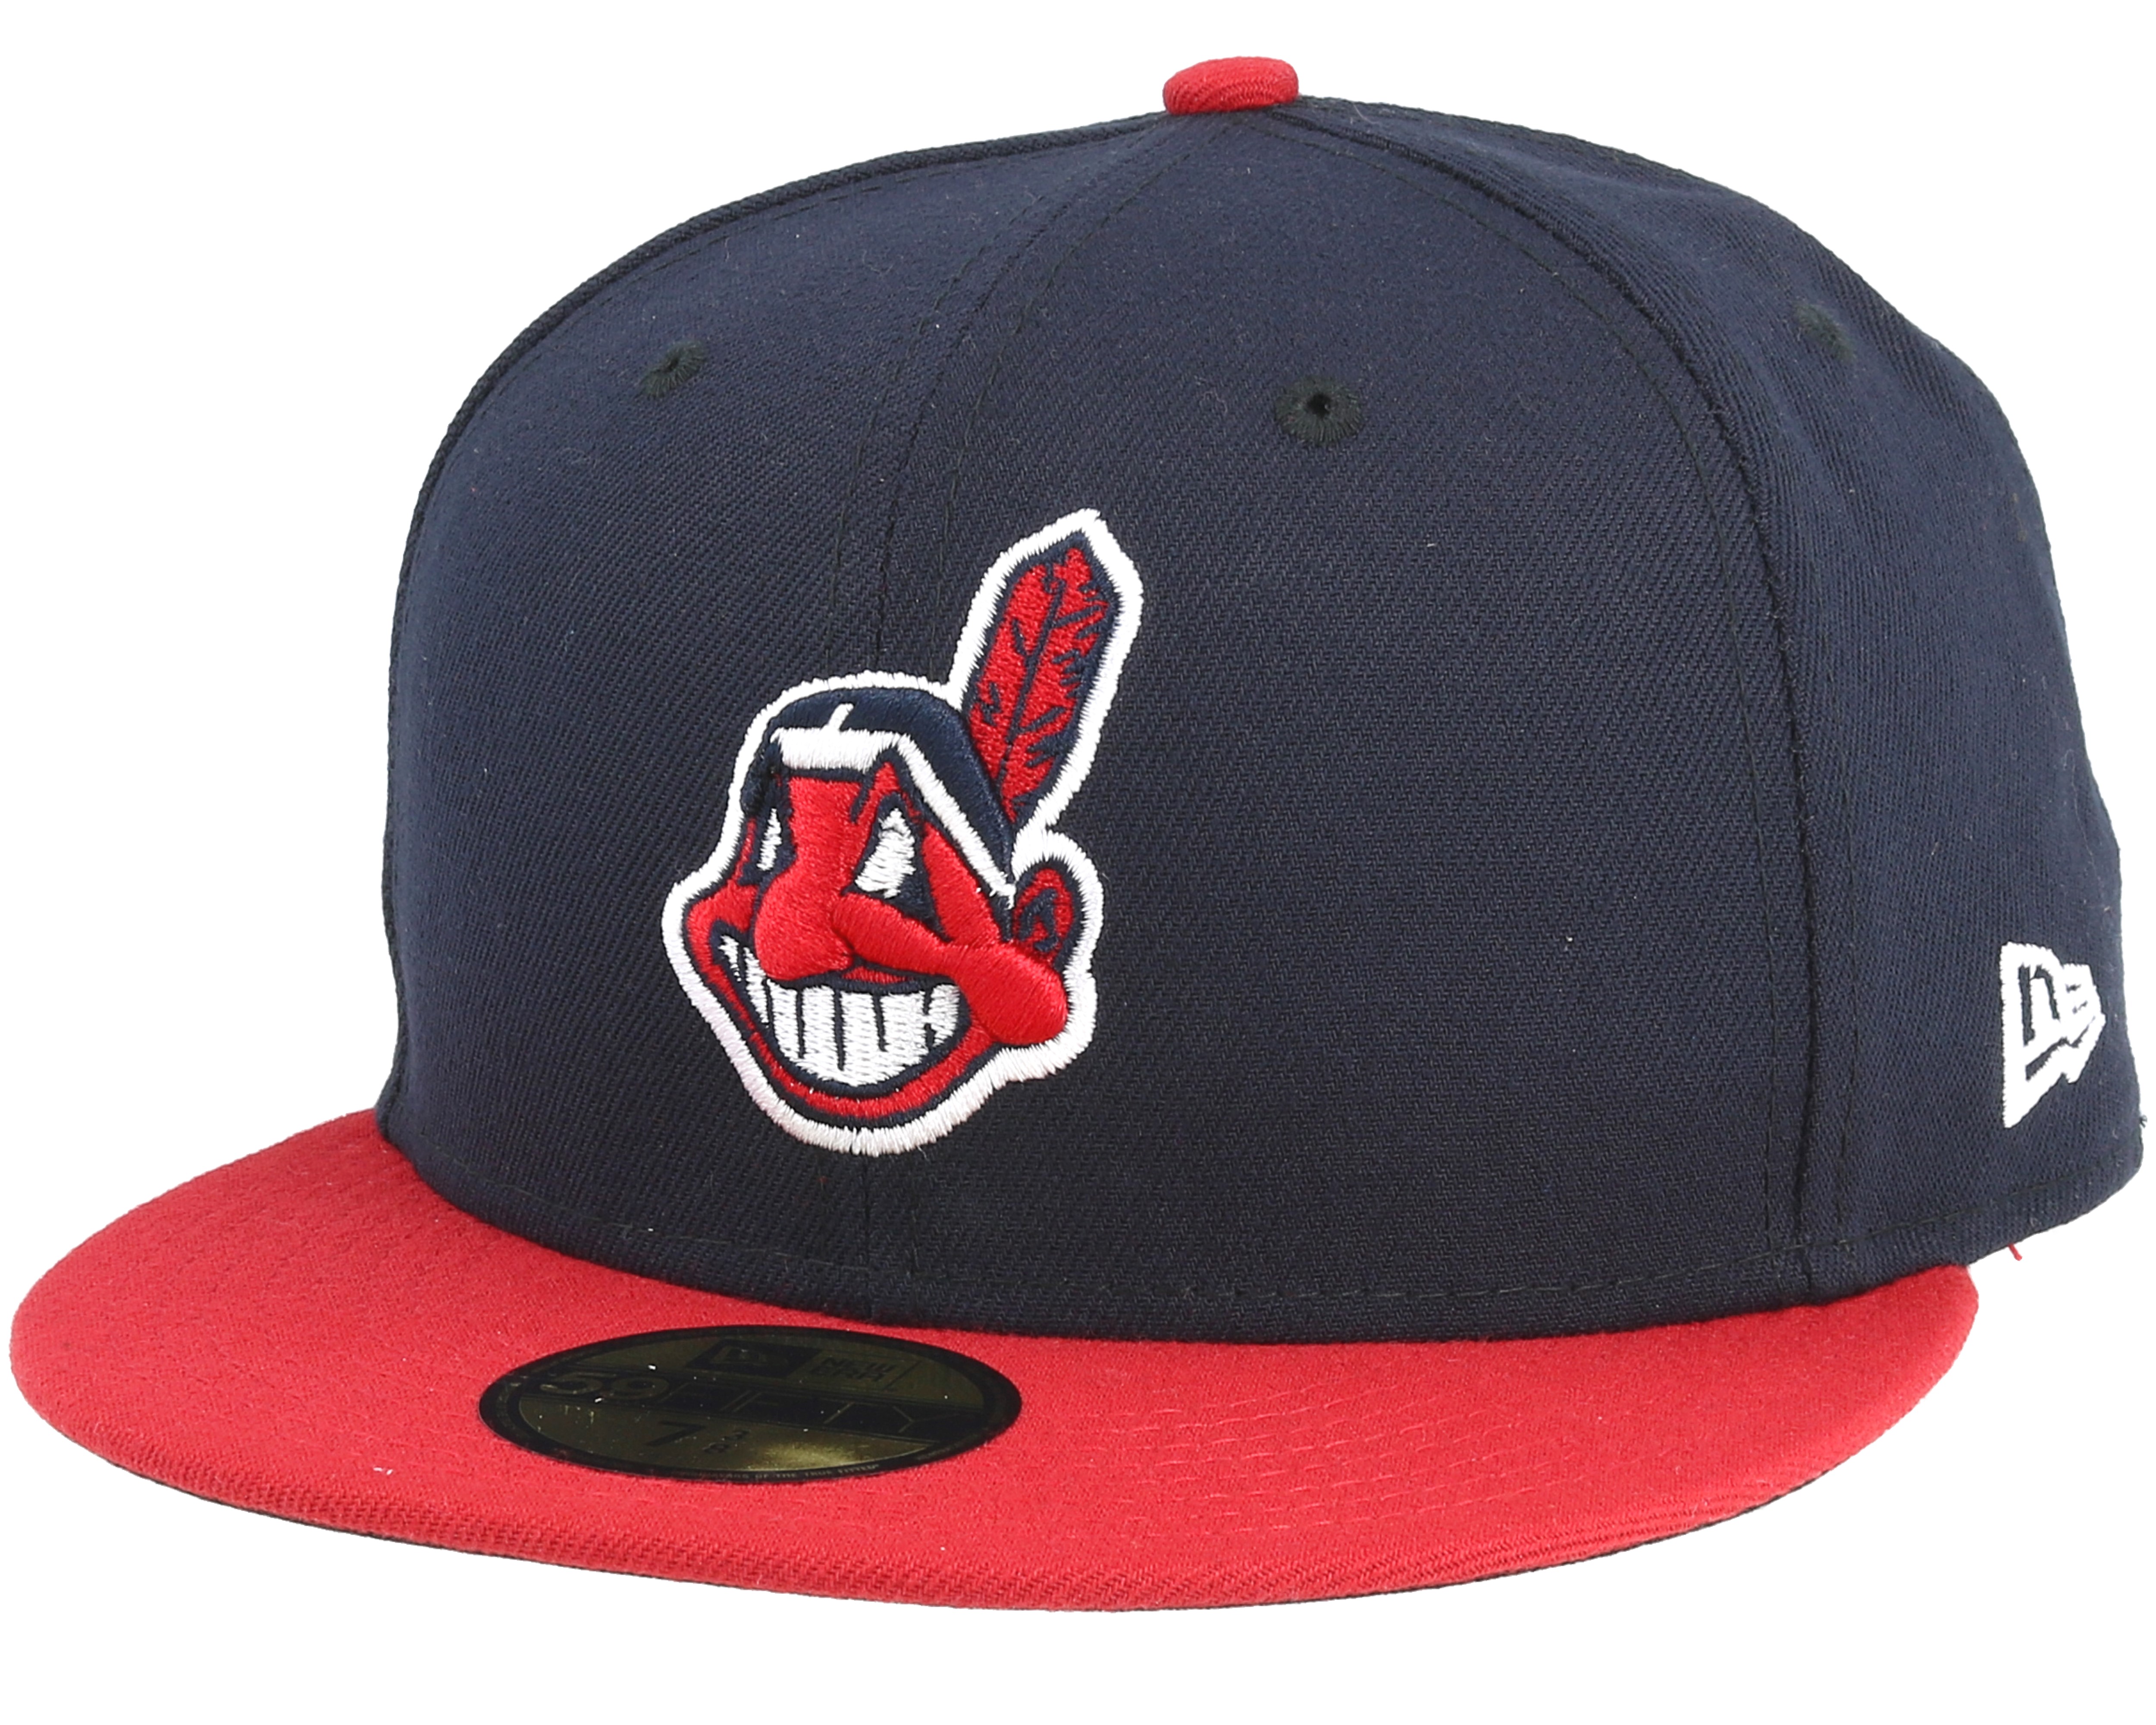 Cleveland Indians Authentic On-Field Game 59Fifty - New Era